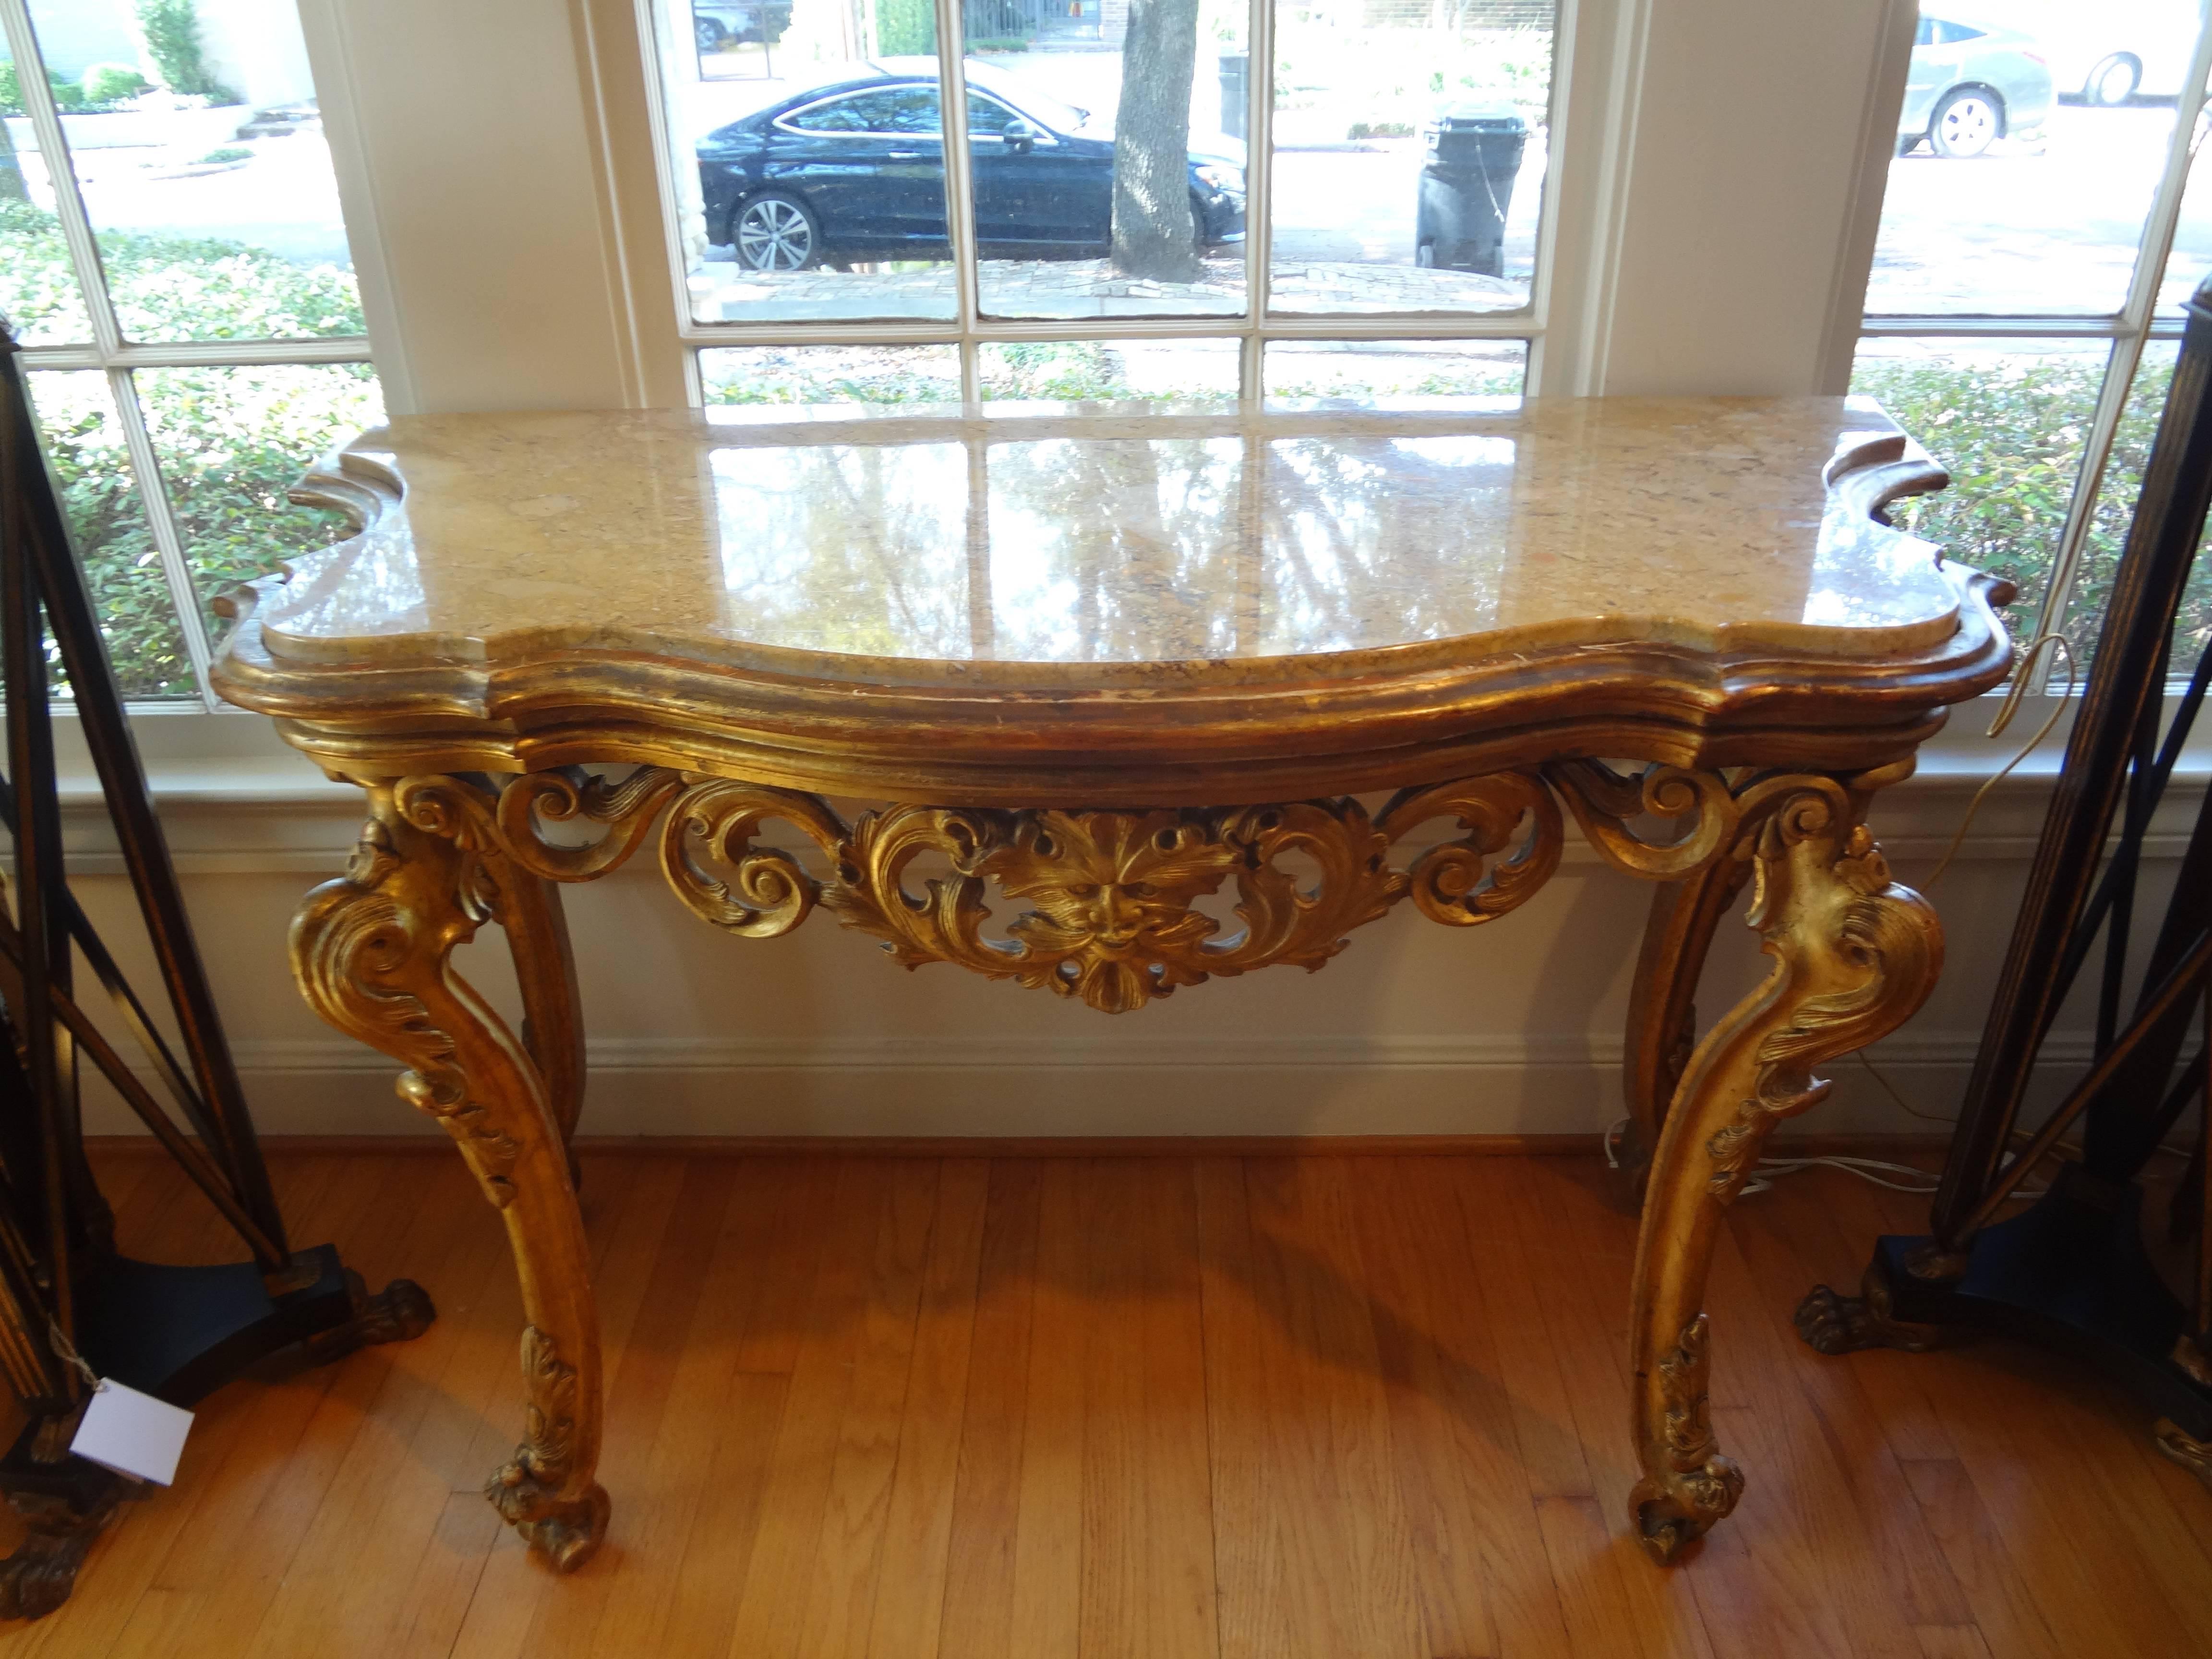 18th century Venetian giltwood console table with marble top.
Gorgeous antique Italian Louis XIV freestanding giltwood console table from Venice with original marble top.
This fabulous antique Italian gilt console or demilune has a central mask